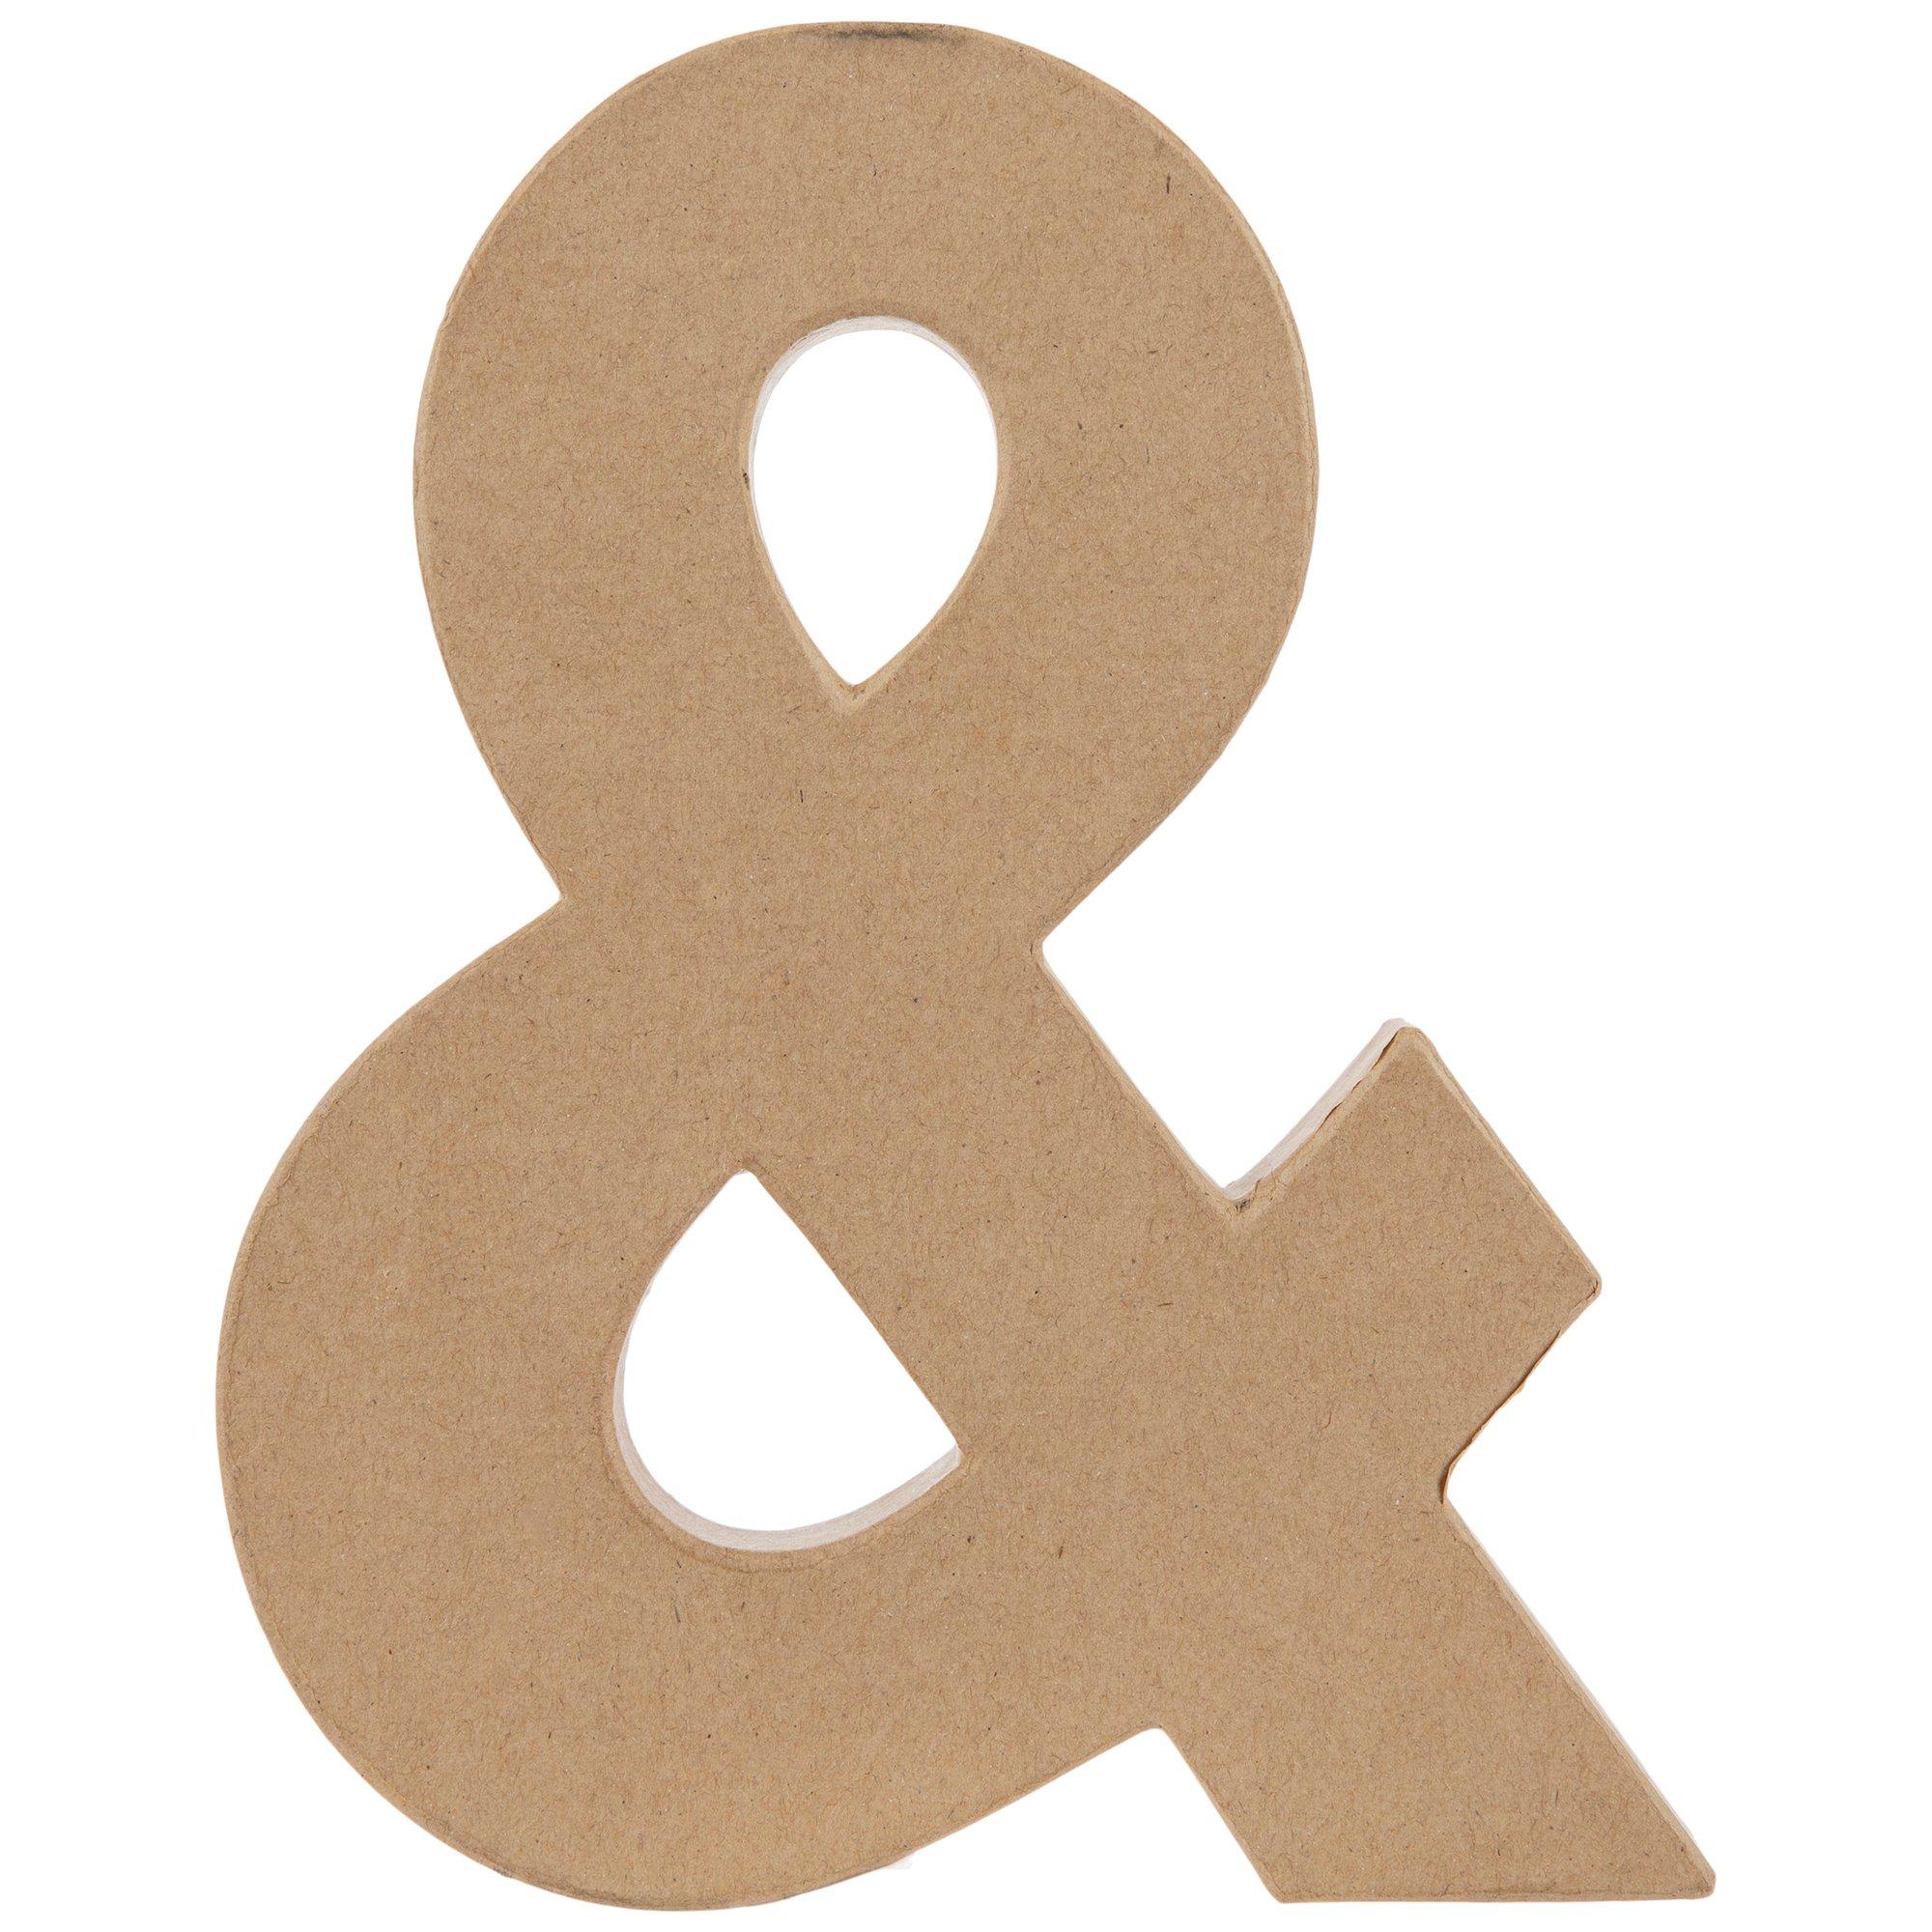 8 Paper Mache Alphabet Letters A-Z including ampersand & Cardboard  letters